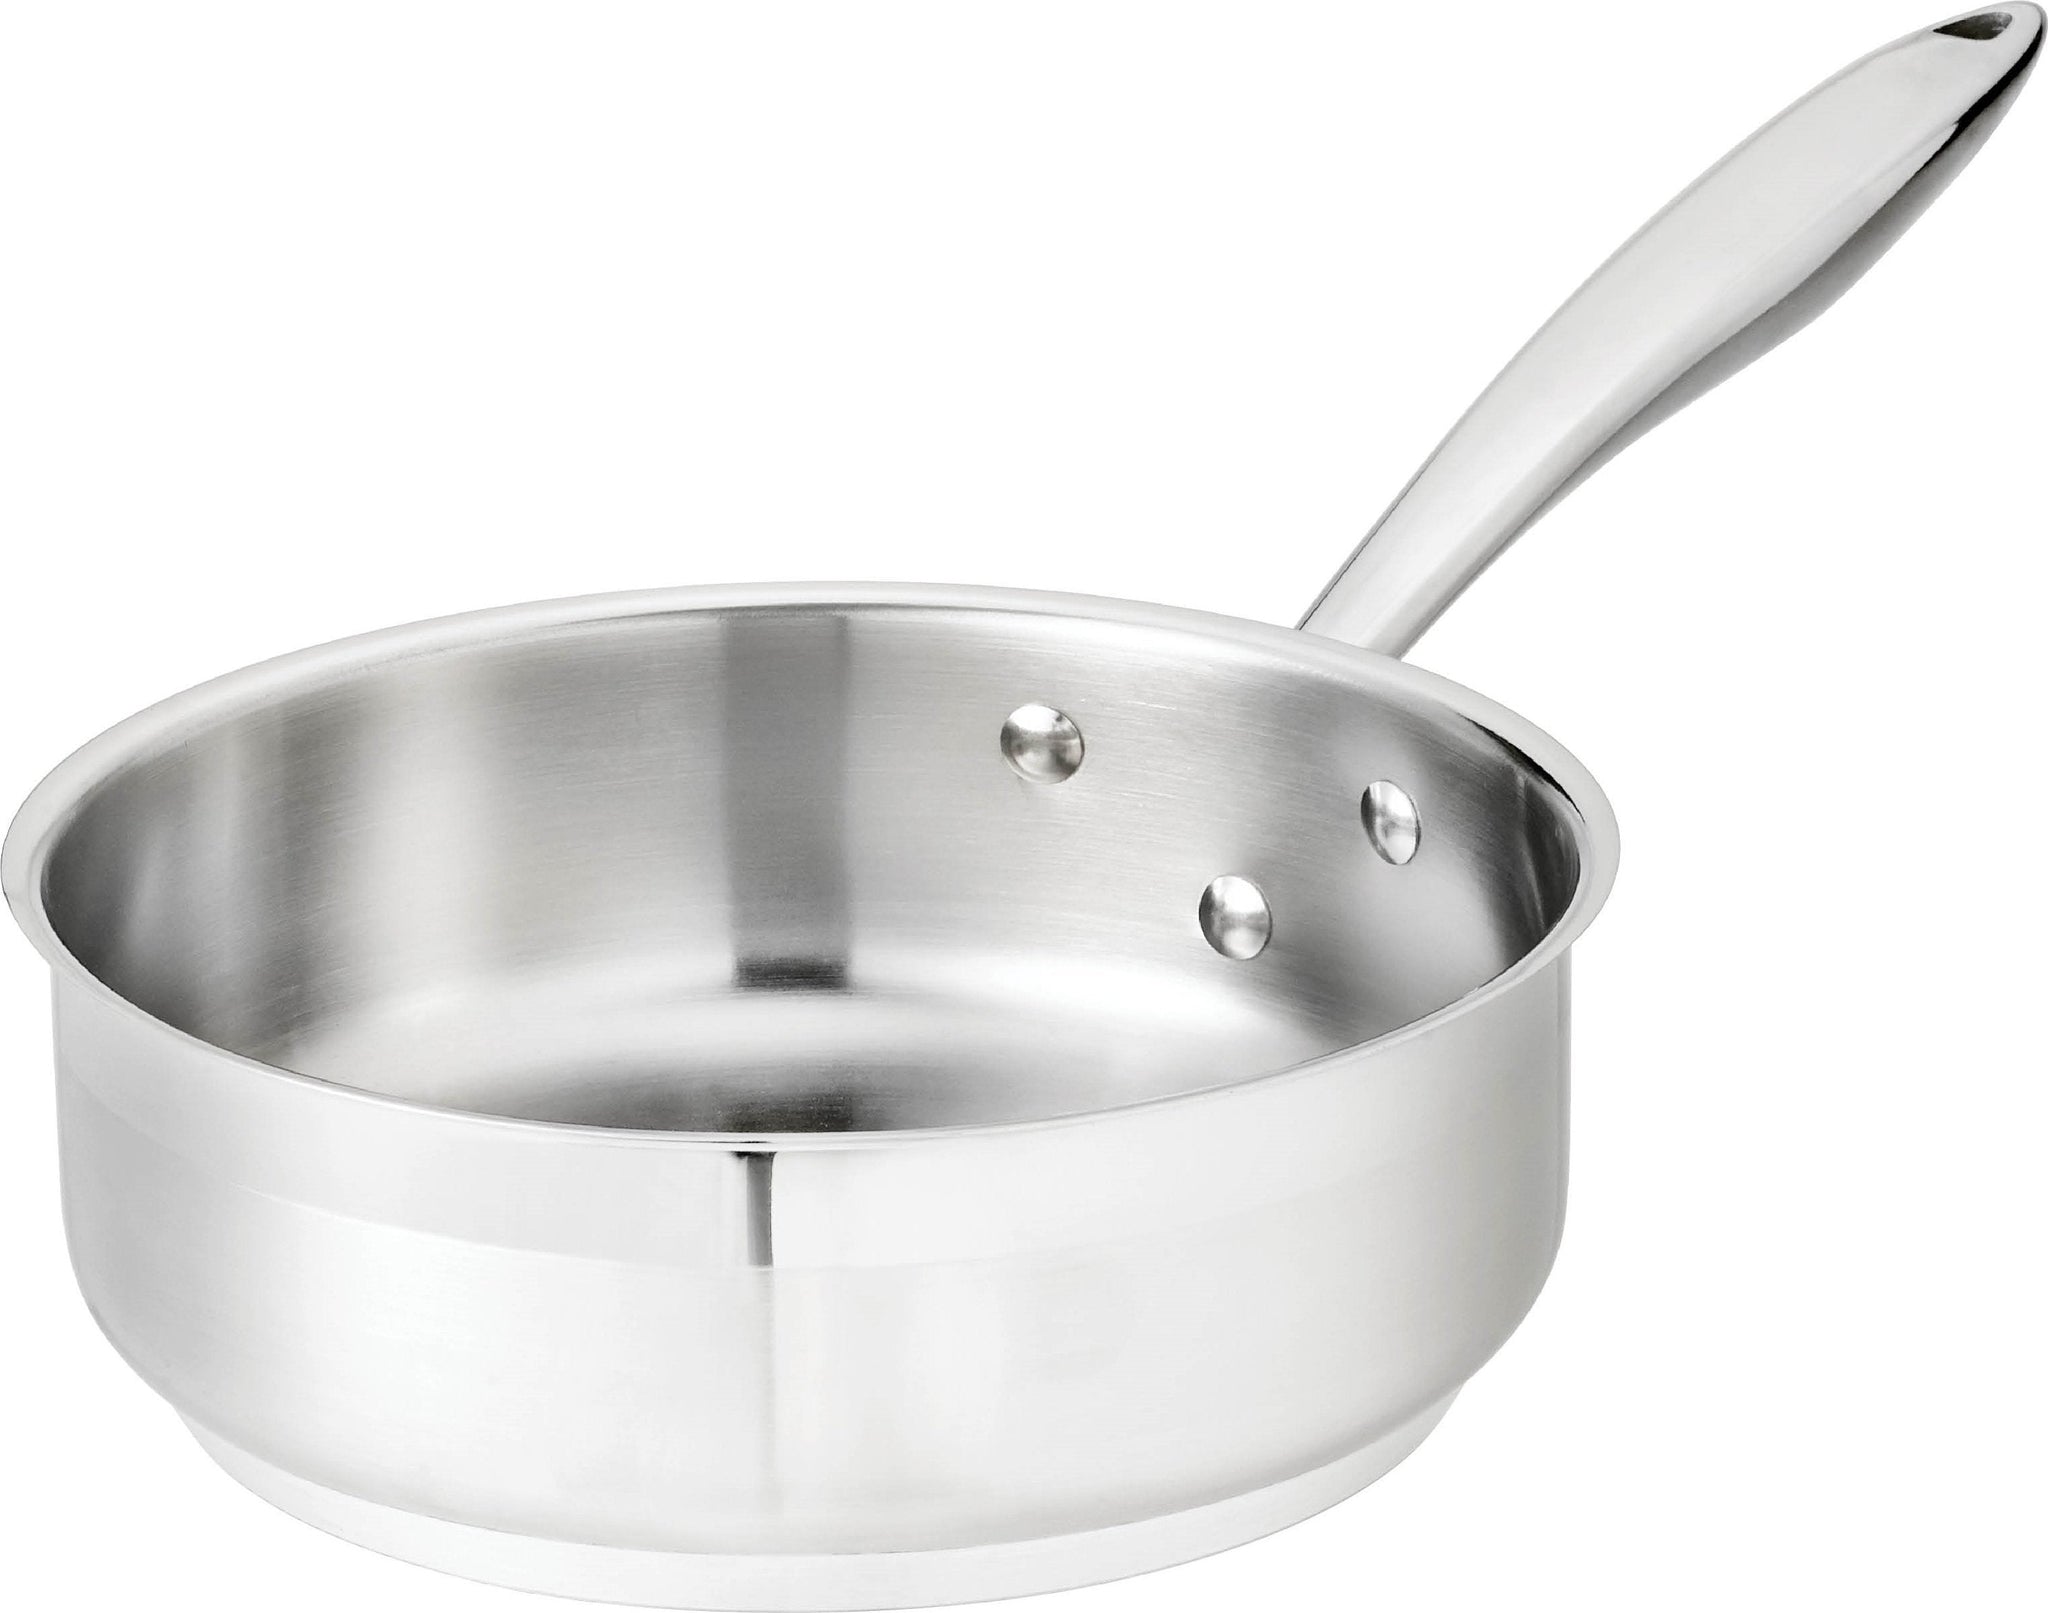 Thermalloy - 2 QT Tri-Ply Stainless Steel Saute Pan (Lid Not Included) - 5724180